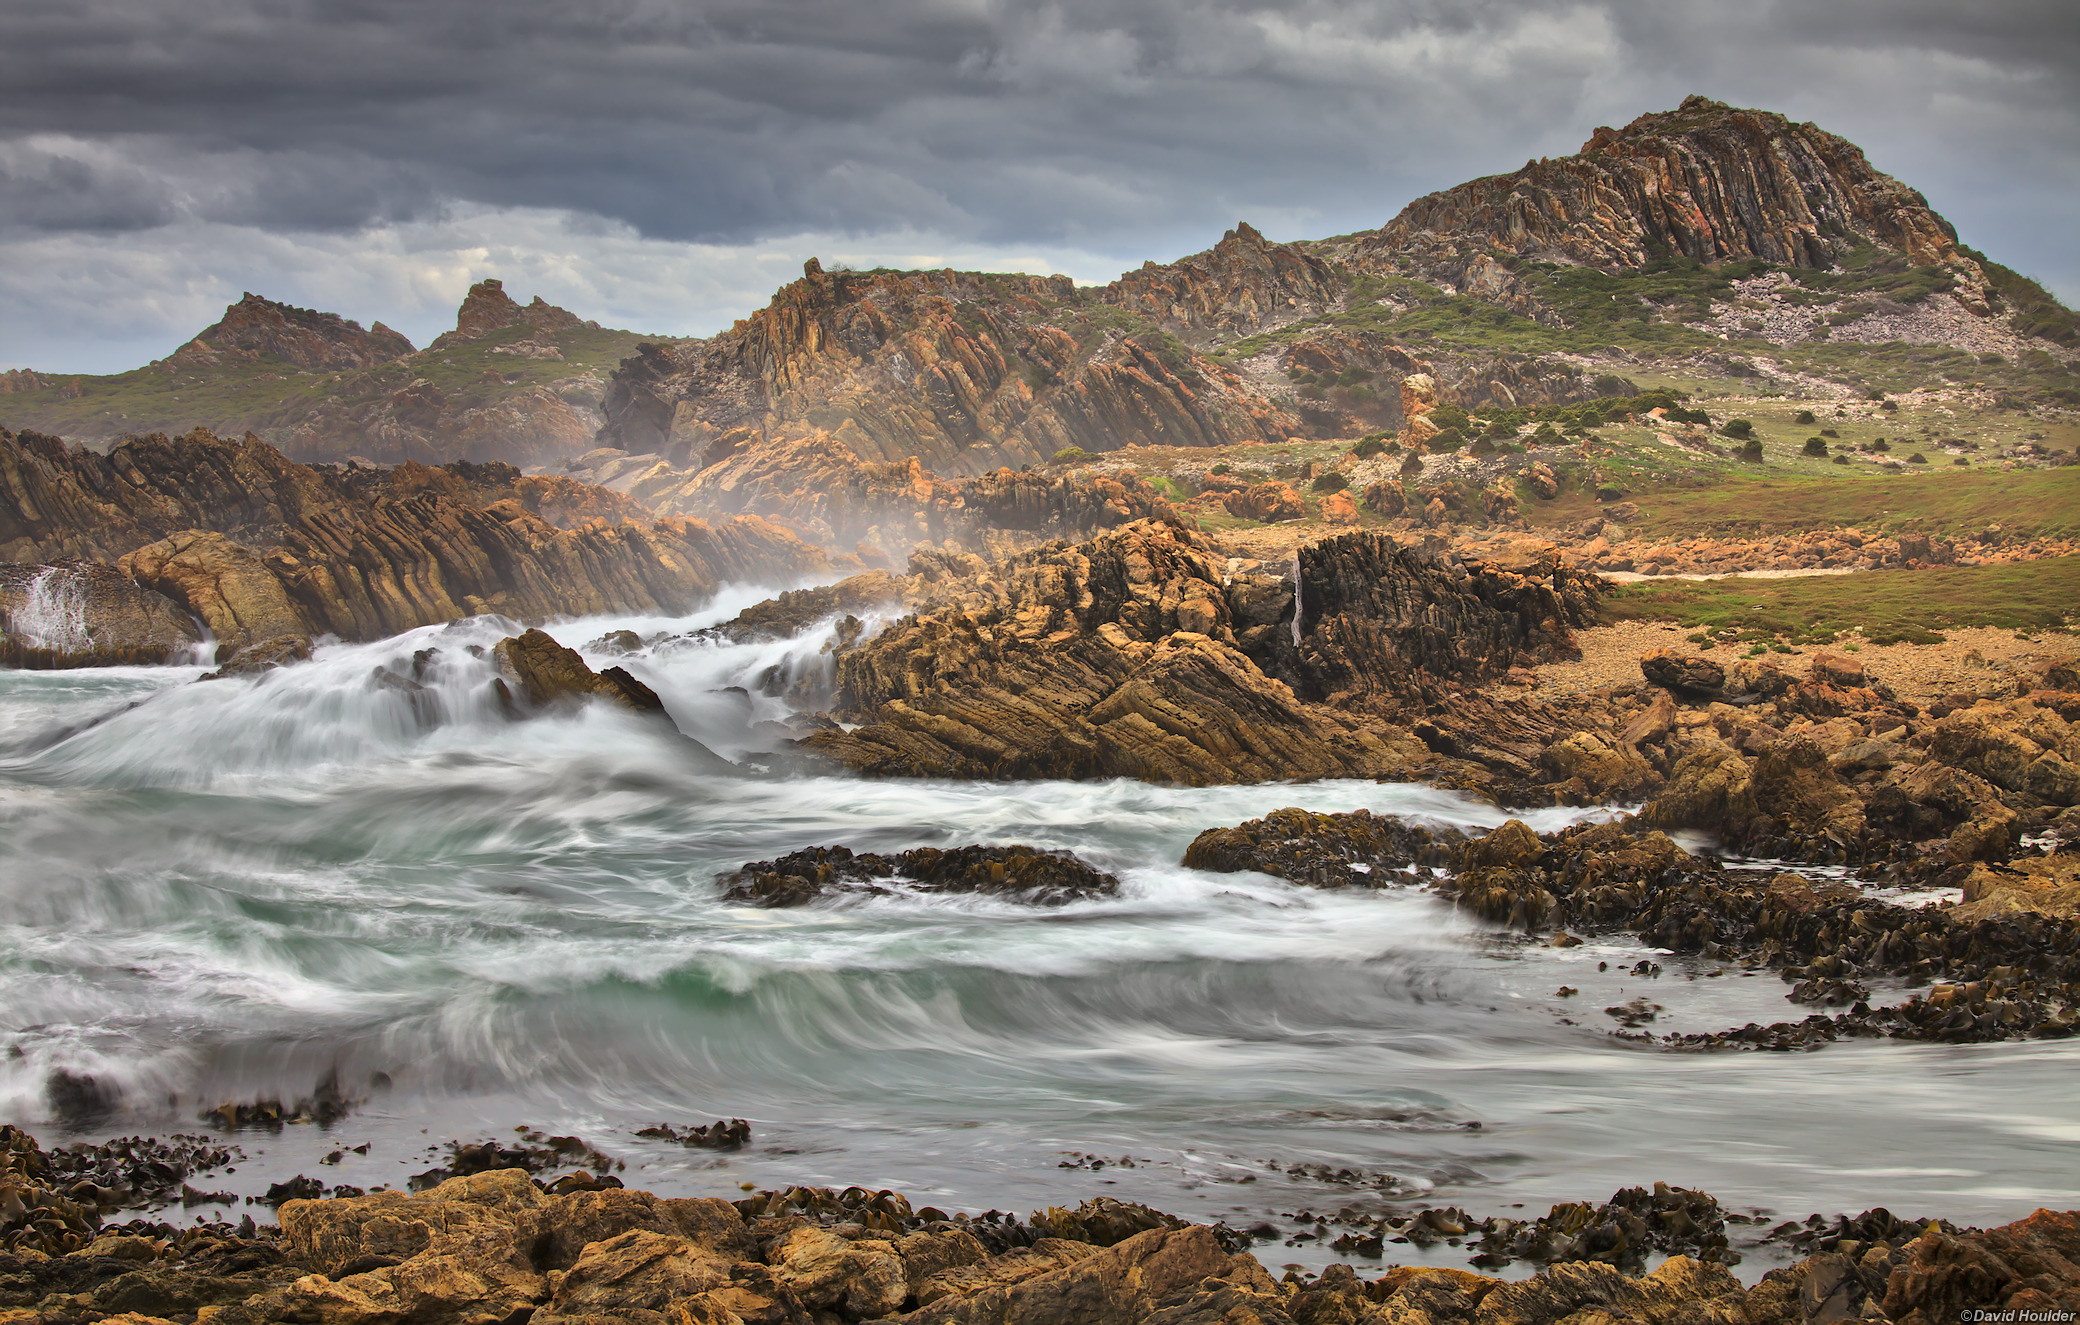 Ocean waves crashing onto rocks with dark clouds and rocky outcrops behind